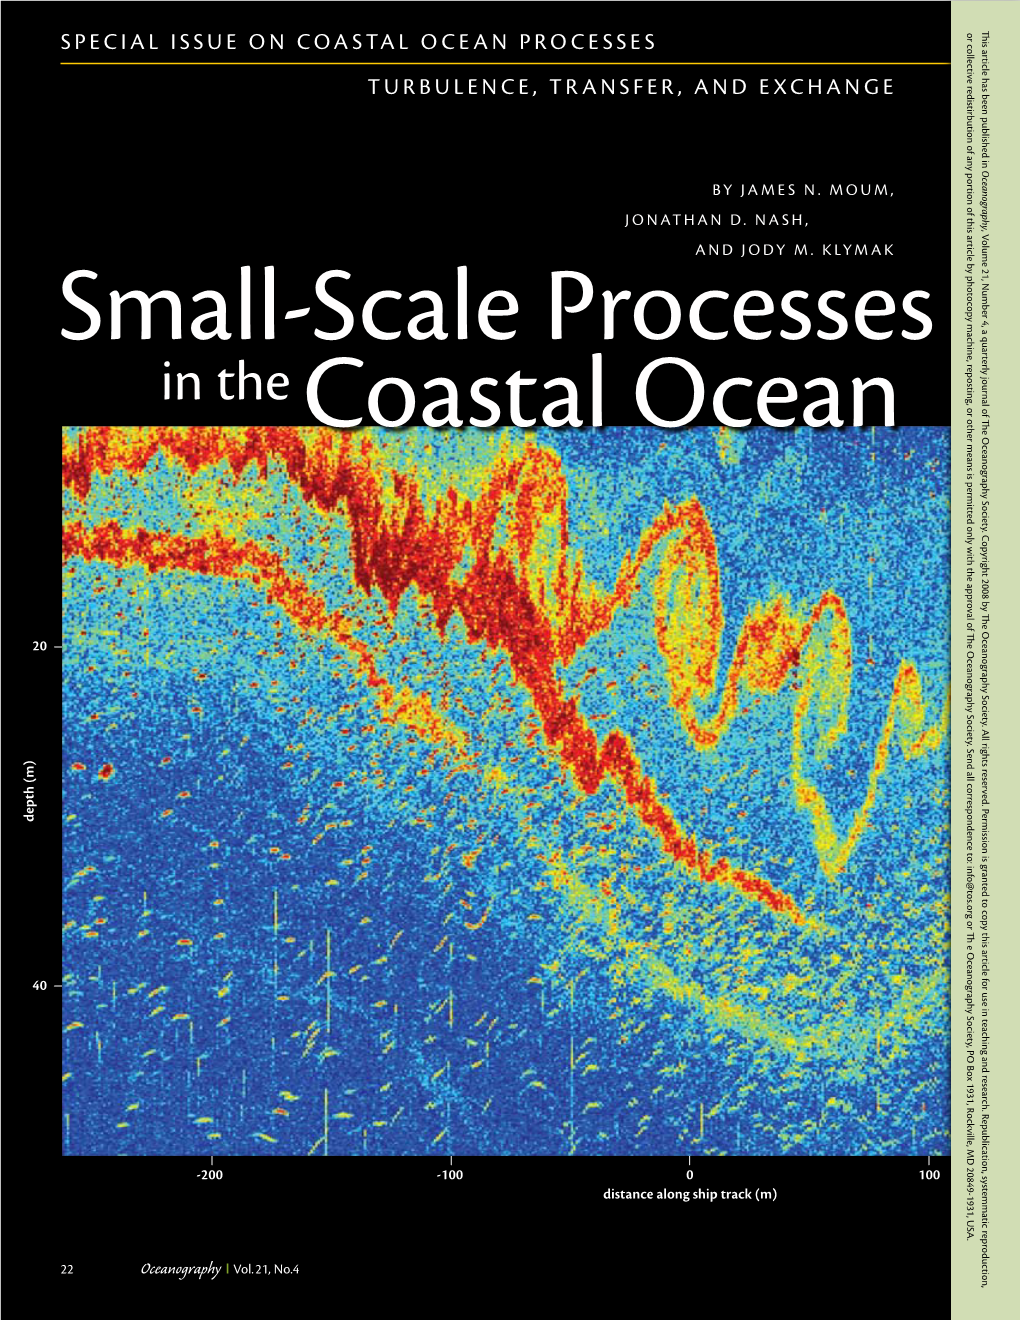 Small-Scale Processes in the Coastal Ocean